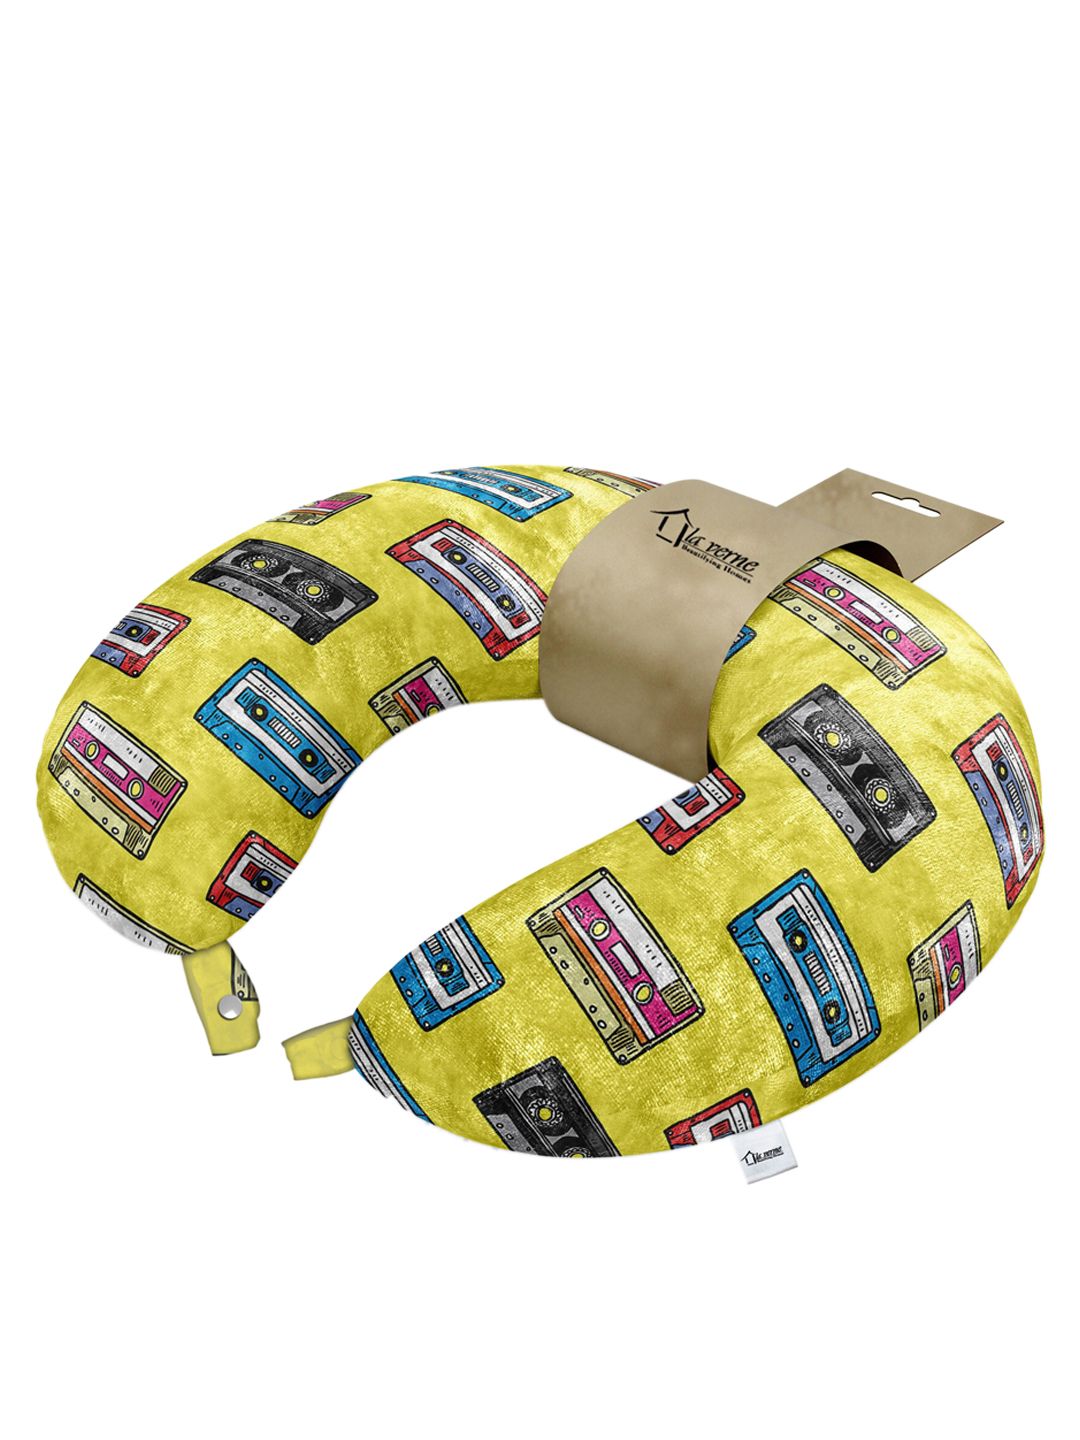 LA VERNE Yellow & Blue Printed Travel Neck Pillow Price in India